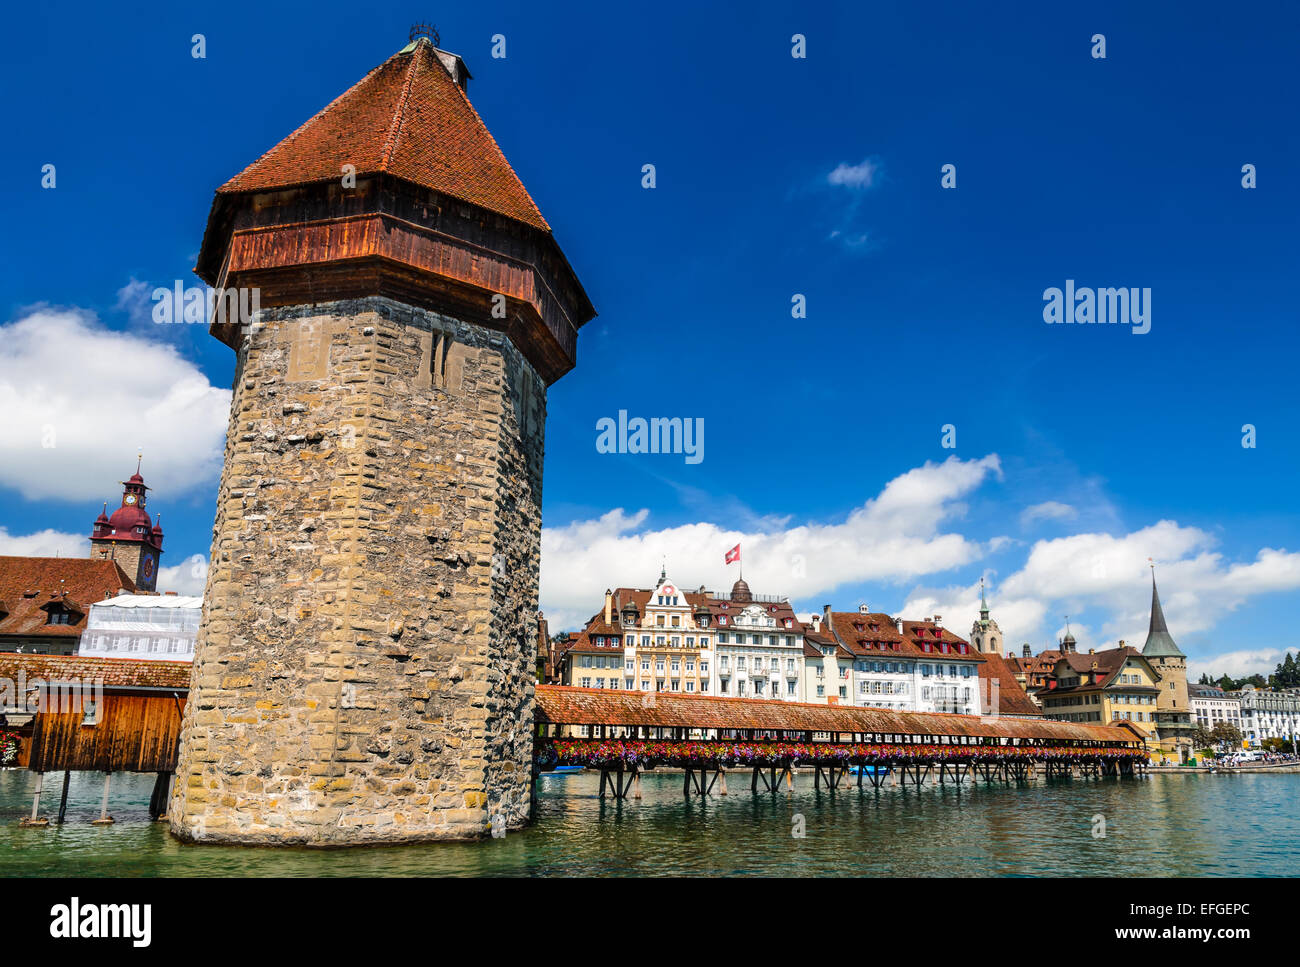 A view of the famous wooden Chapel Bridge of Luzerne, Lucerne in Switzerland, with the water tower and Reuss River. Stock Photo